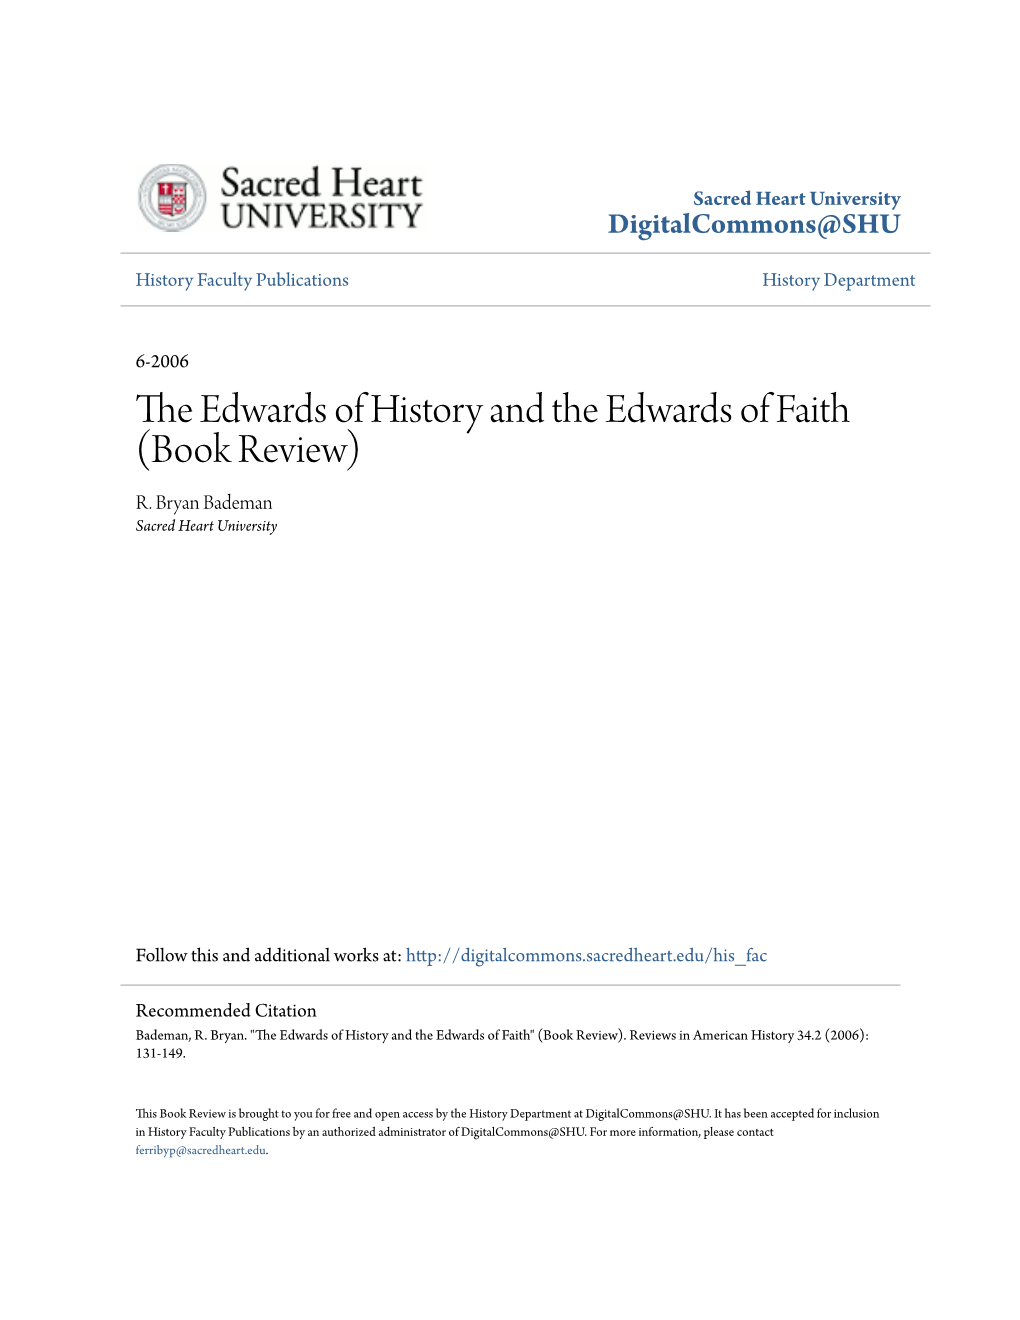 The Edwards of History and the Edwards of Faith (Book Review)